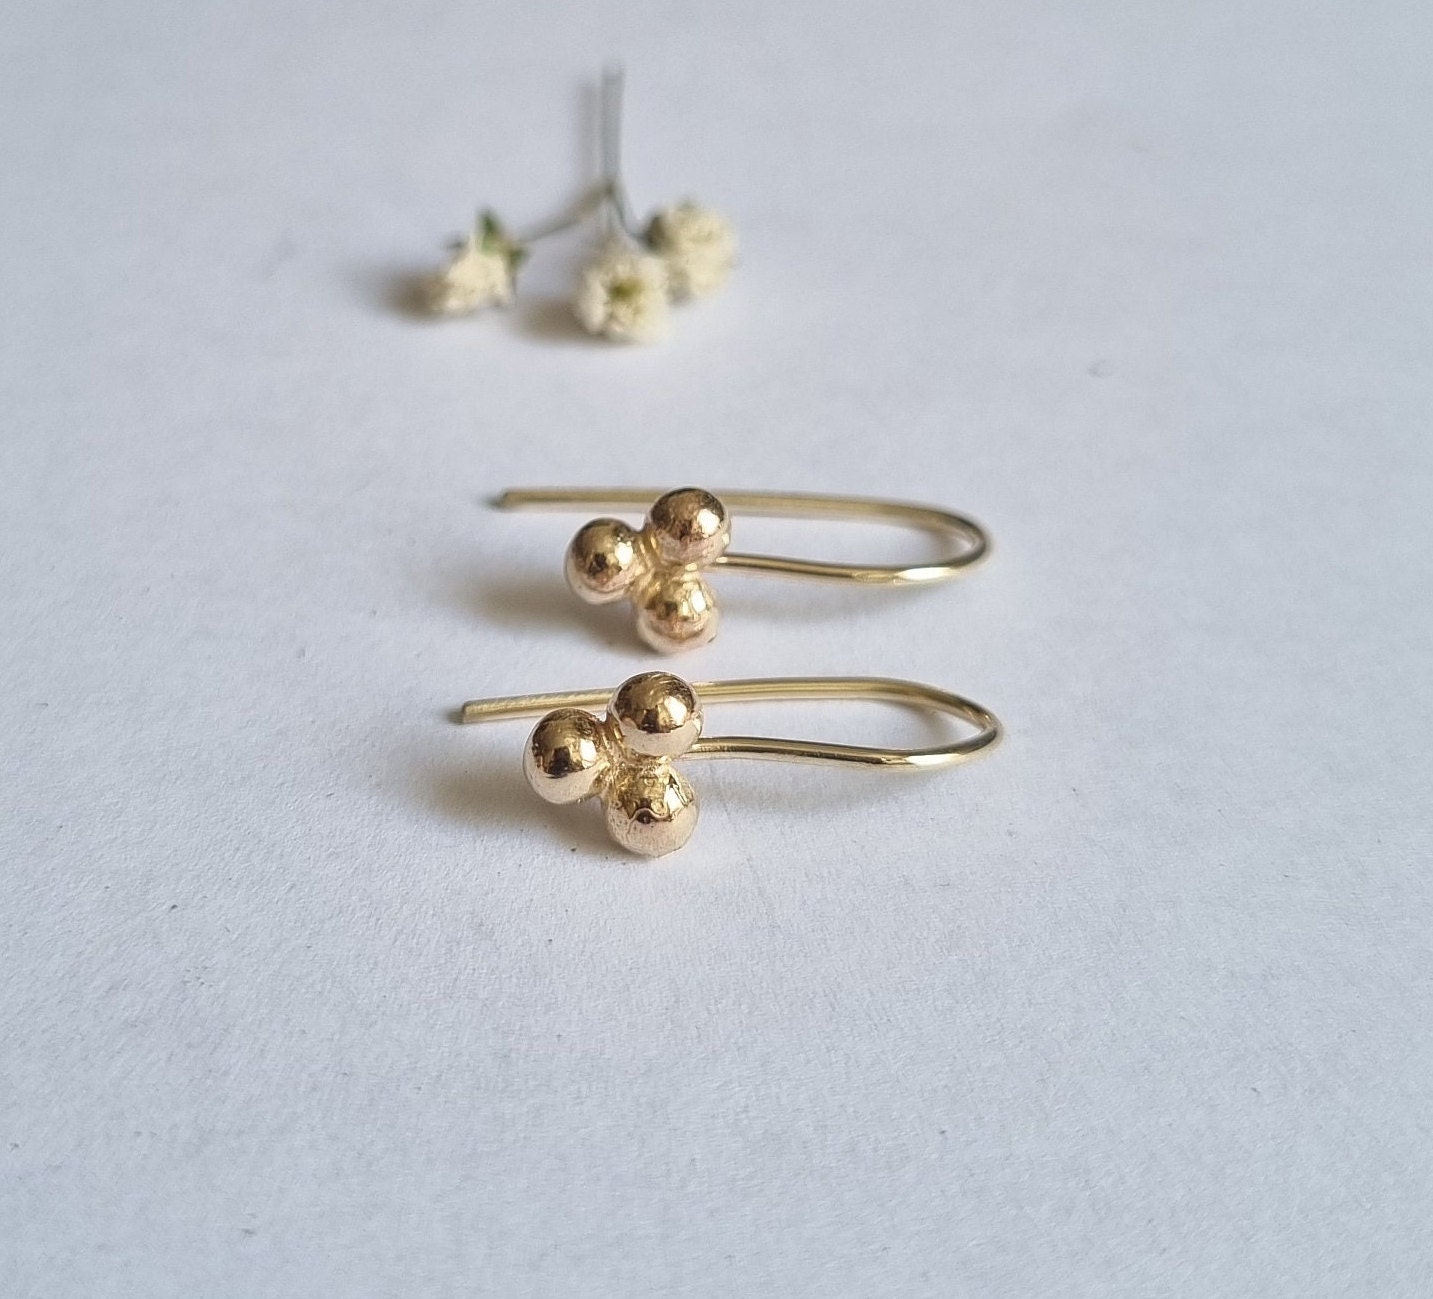 Daily wear small gold earrings design for girls - Simple Craft Idea